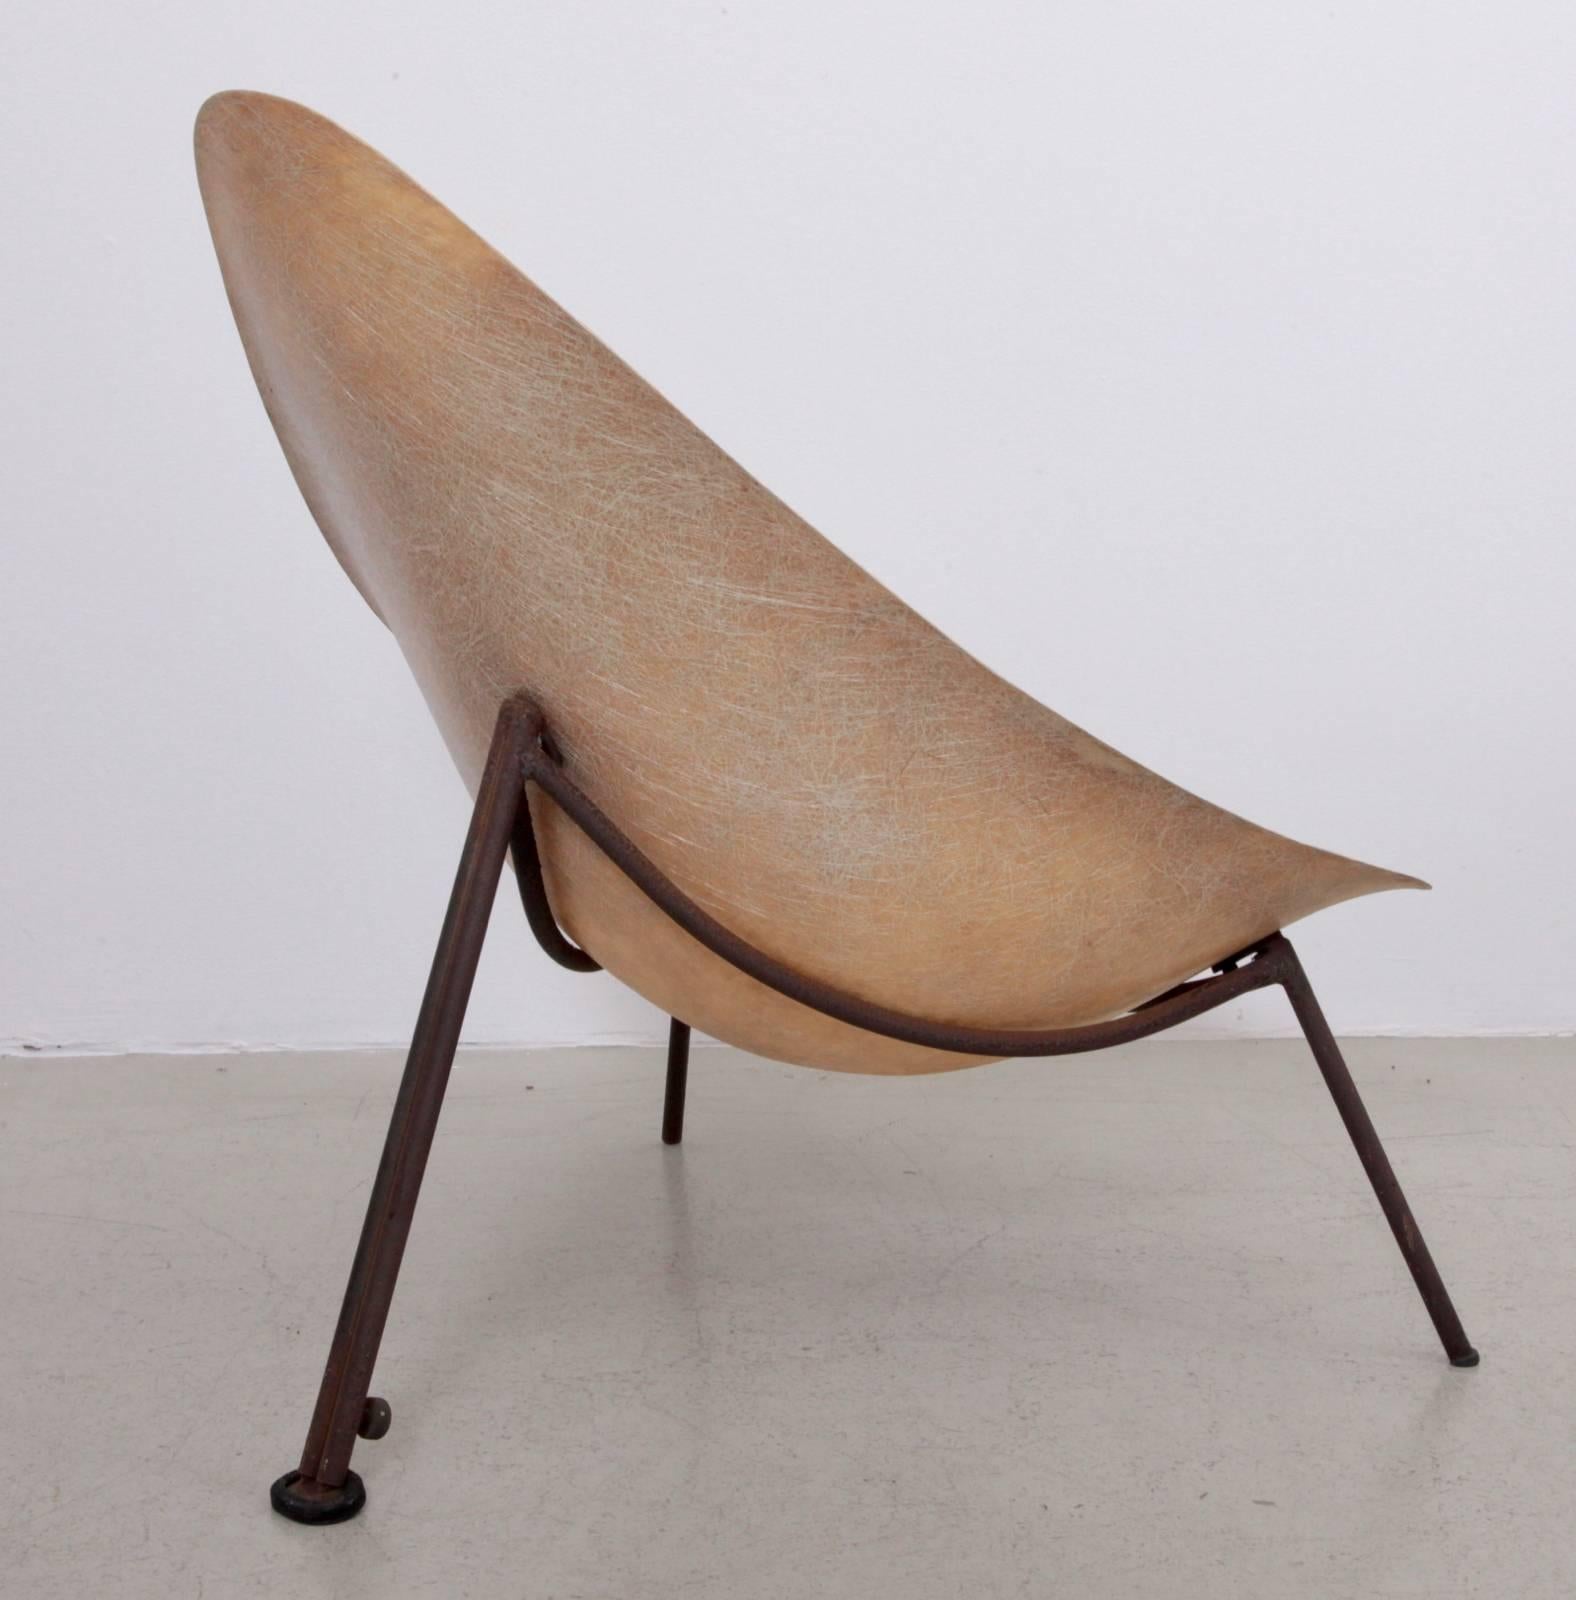 Mid-20th Century Early French Fiberglass Lounge Chair in Parchment by Ed Merat, France, 1956